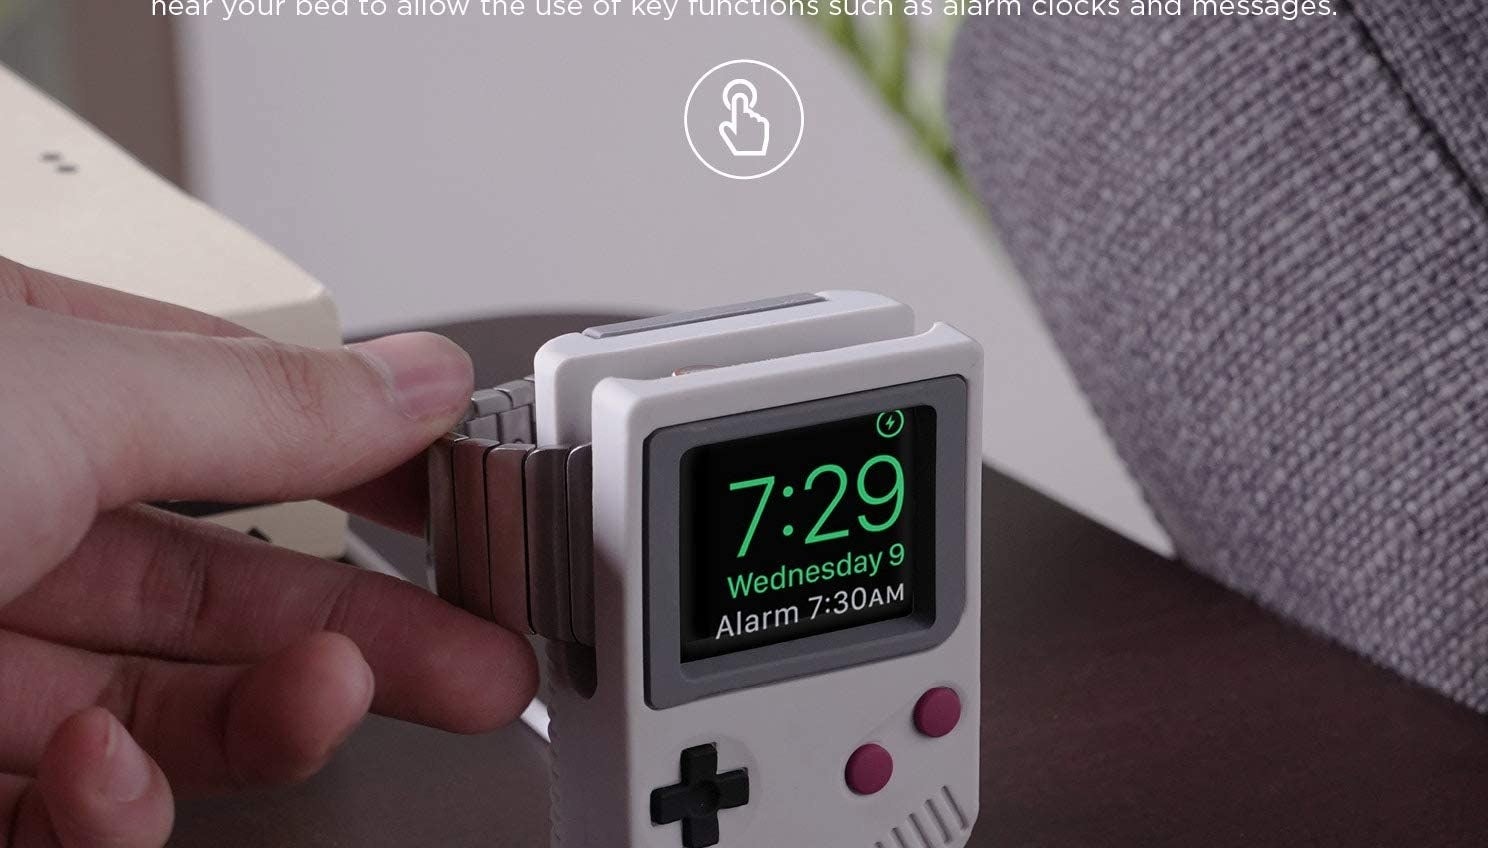 The Apple Watch stand designed to look like the old Game Boy